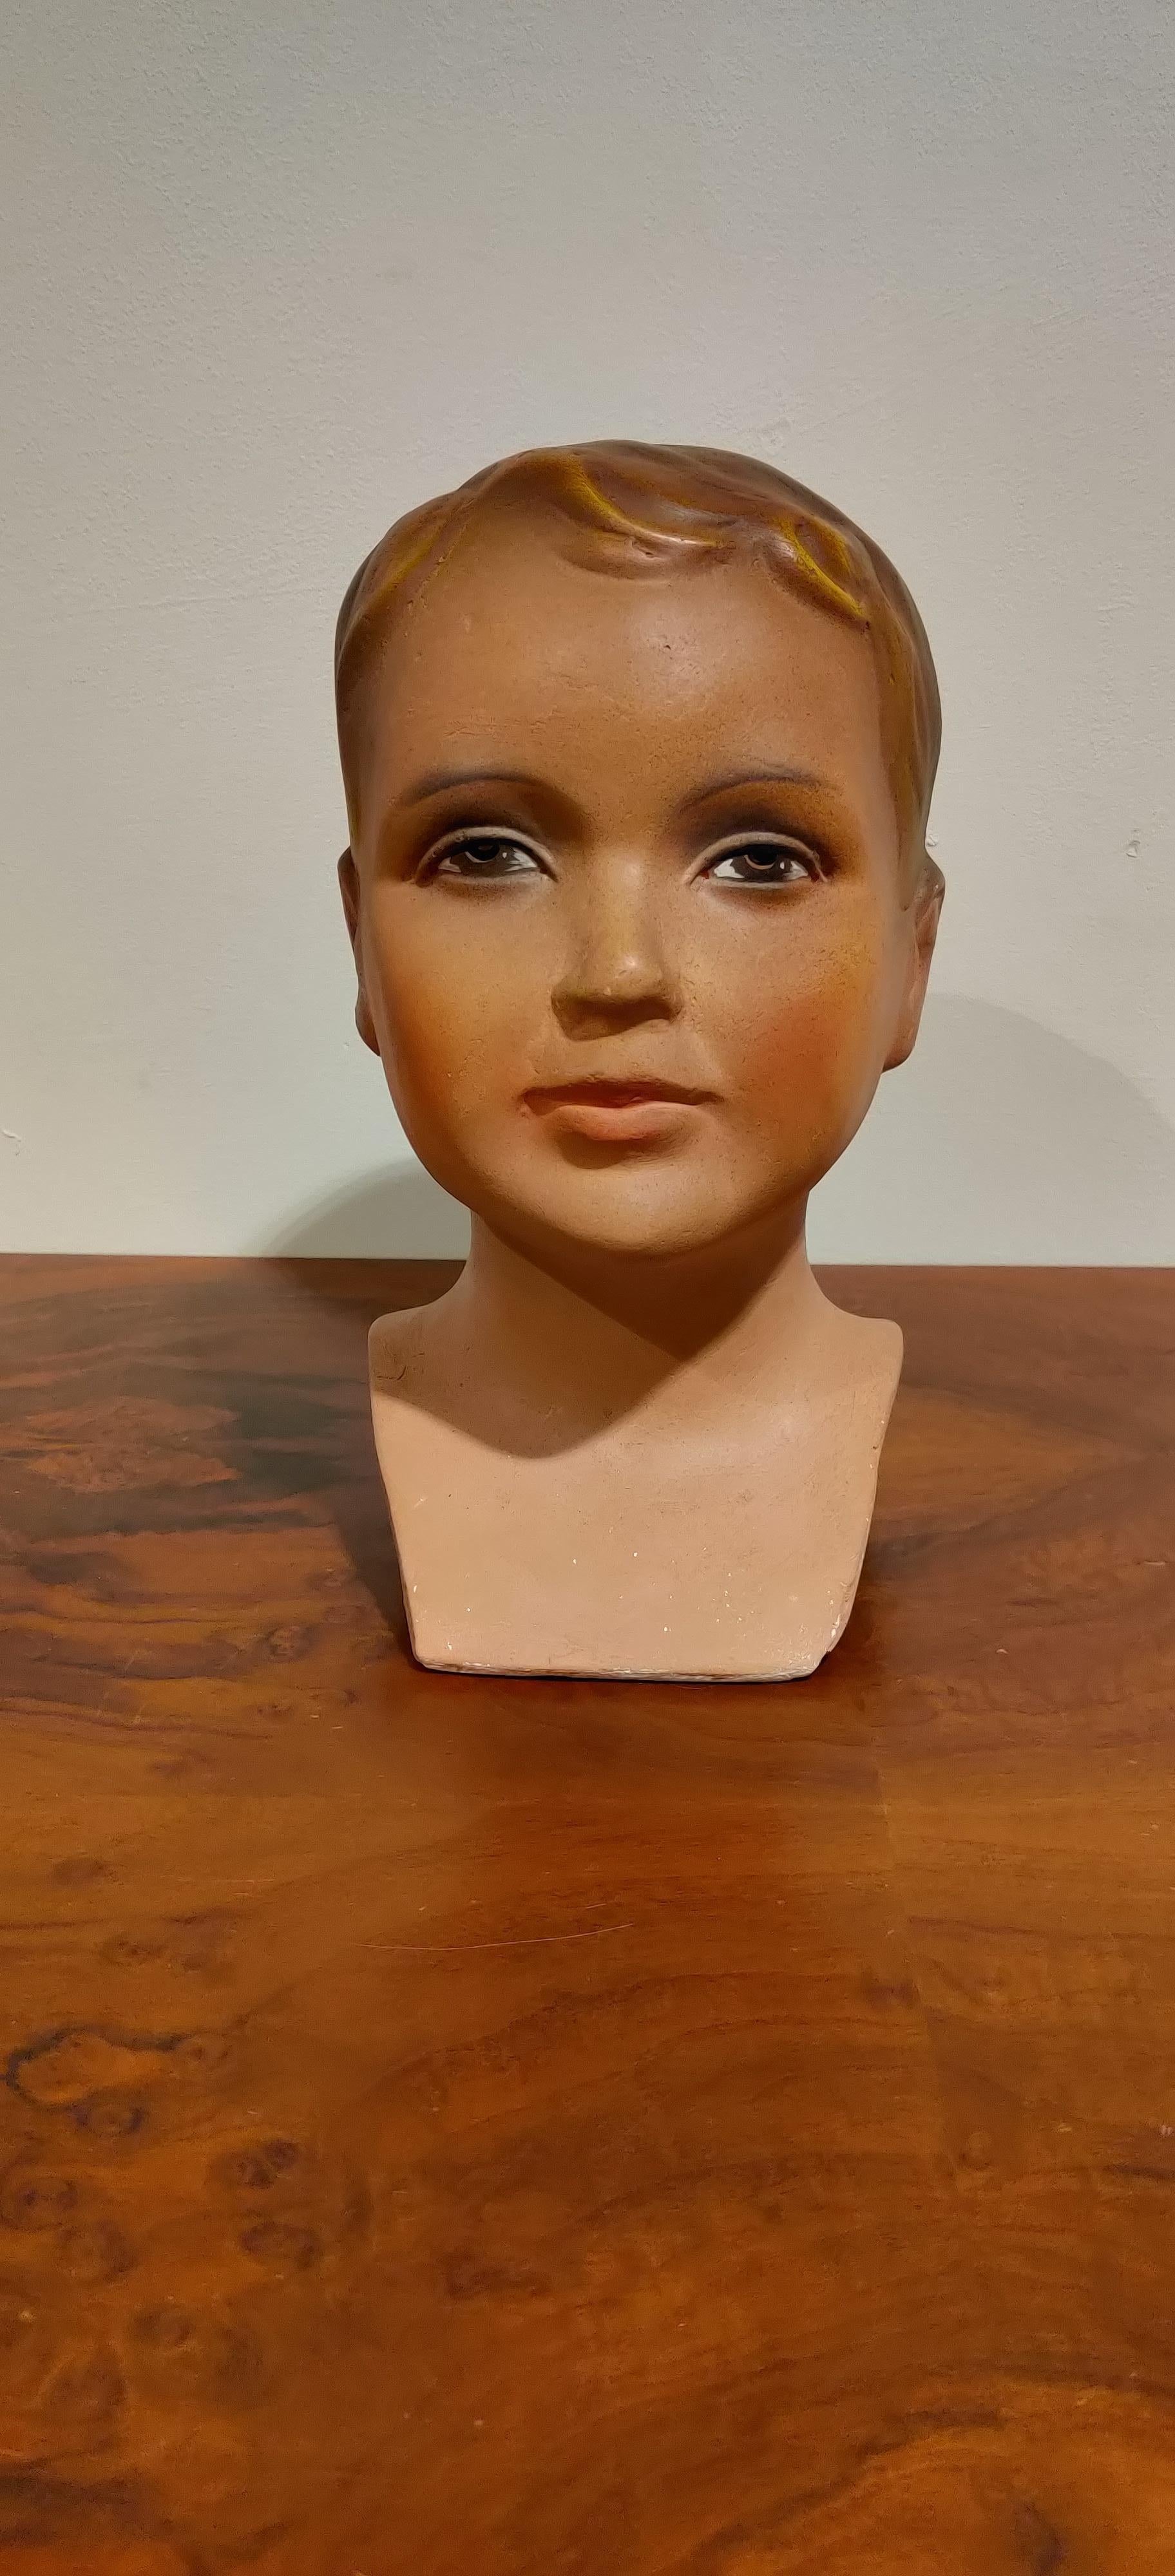 Beautiful child mannequin head made from plaster. 

It has some minor user traces.

Comes from a lot acquired from a clothes shop that stopped activities.

Great decorative item to display glasses, hats,..

France - 1960s

Measure: Height